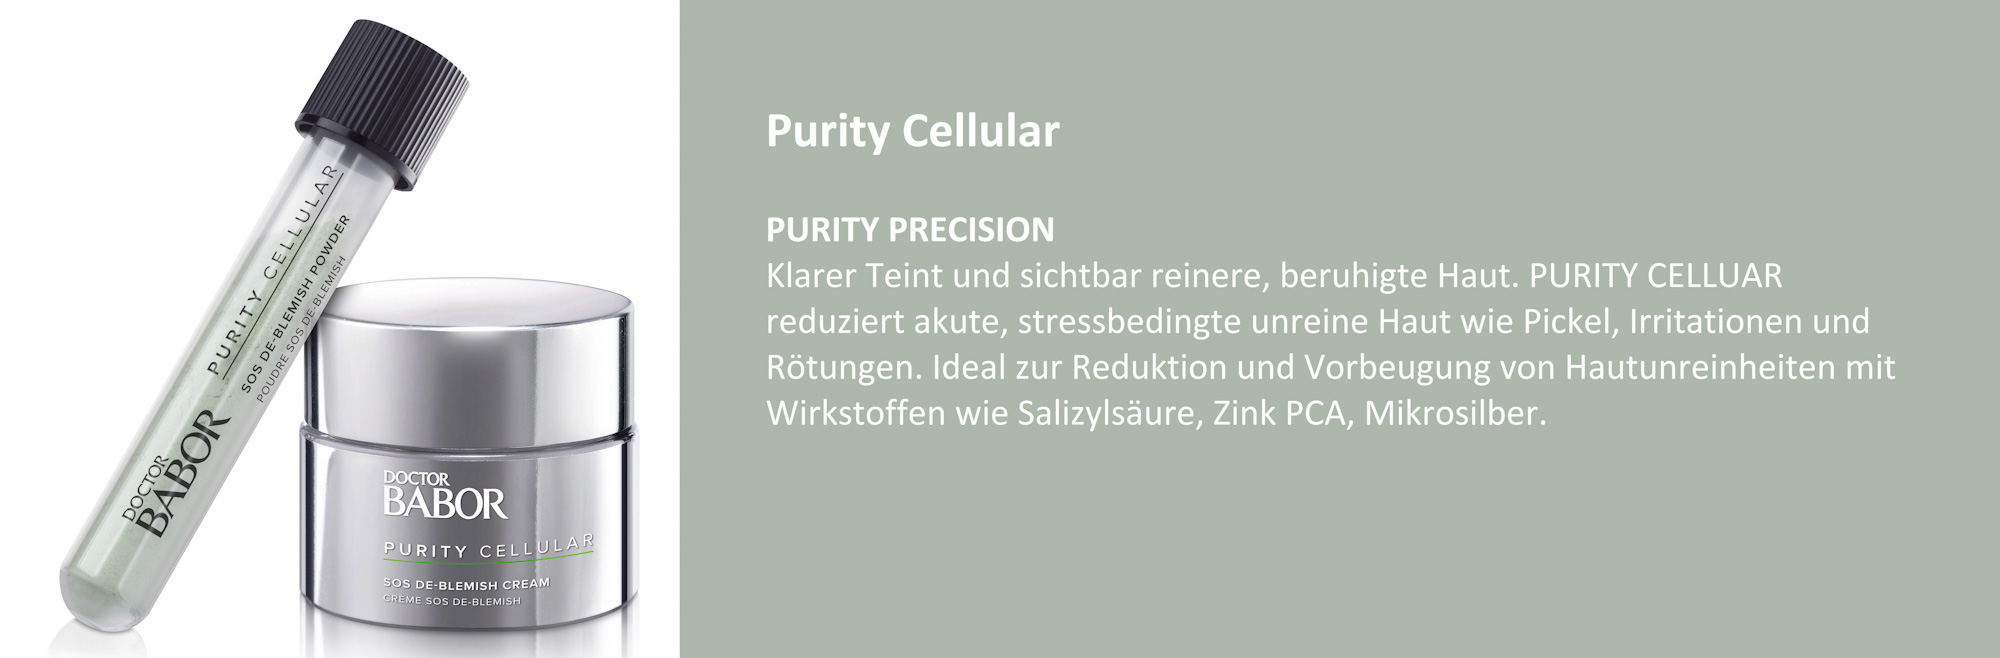 Purity Cellular